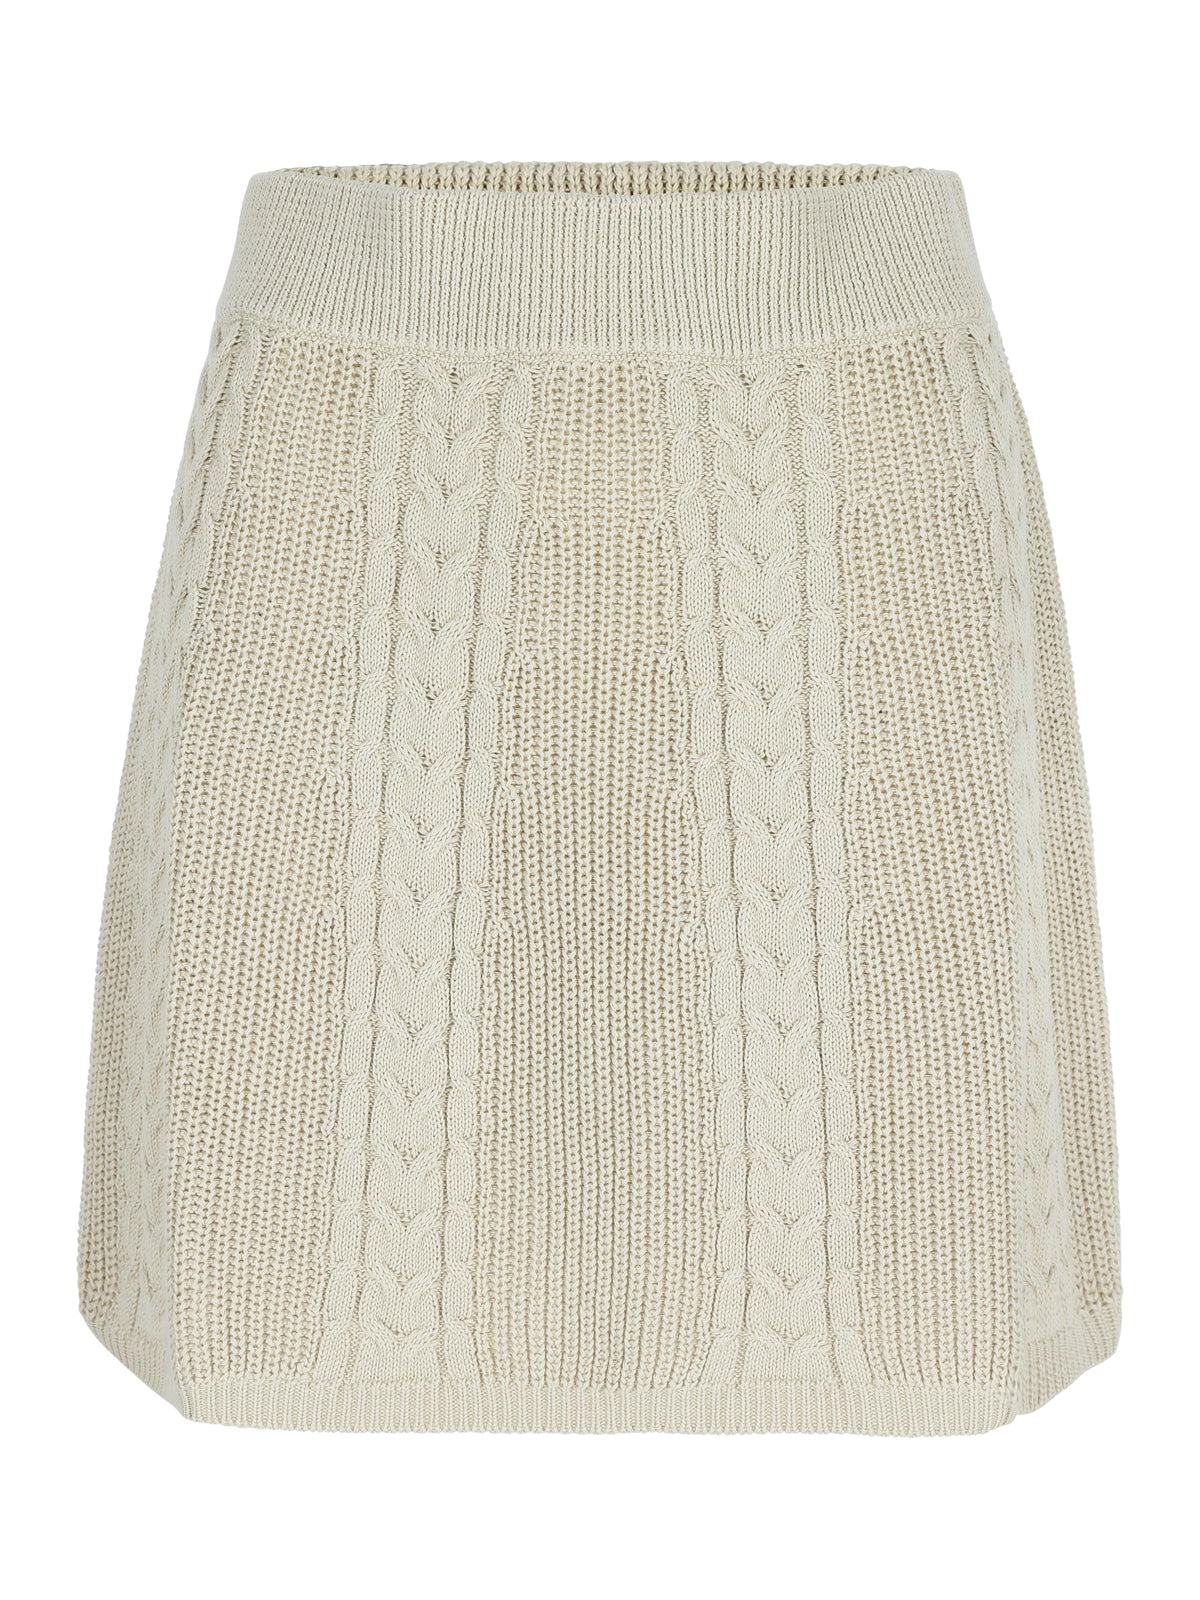 Melvie cable skirt